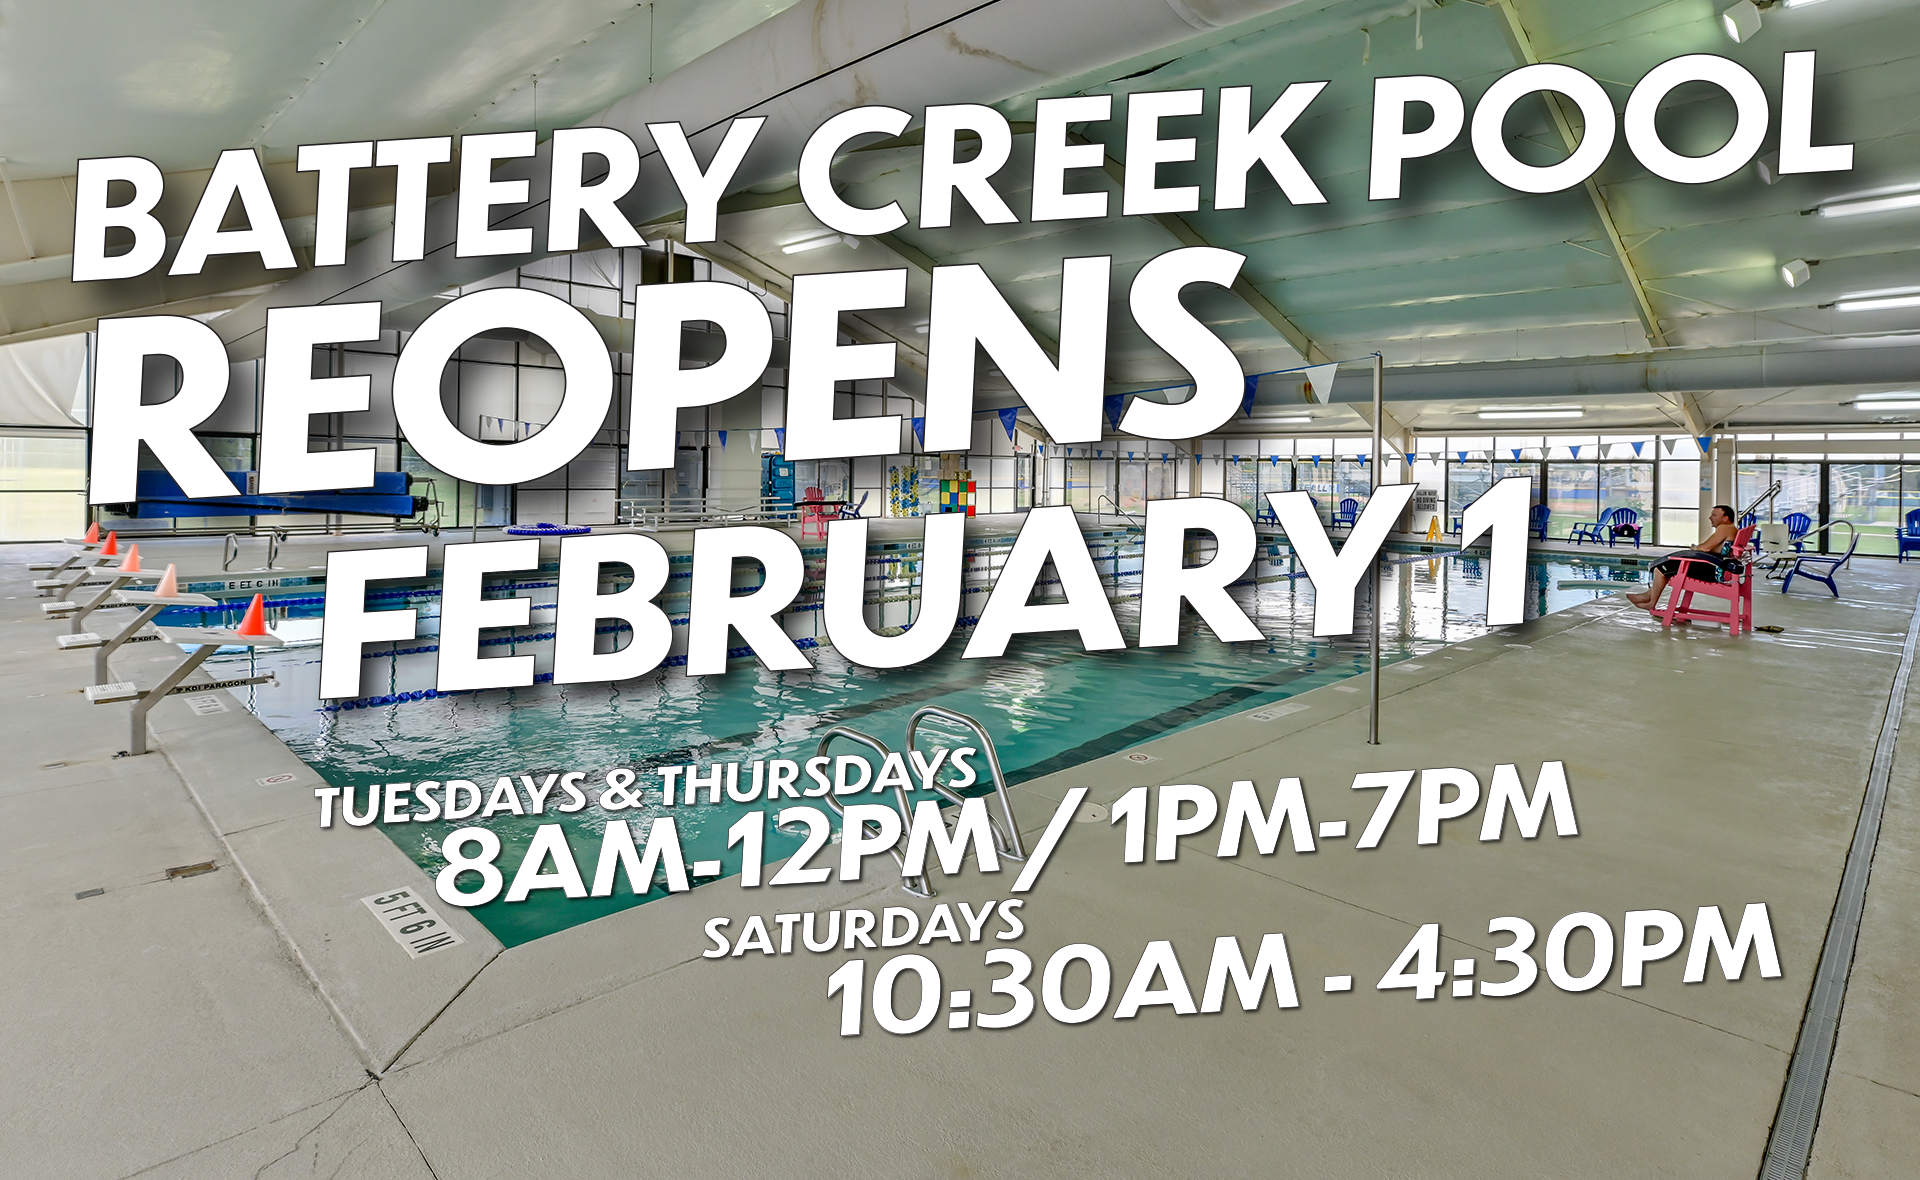 Beaufort County's Battery Creek Pool Re-Opens Tuesday, February 1